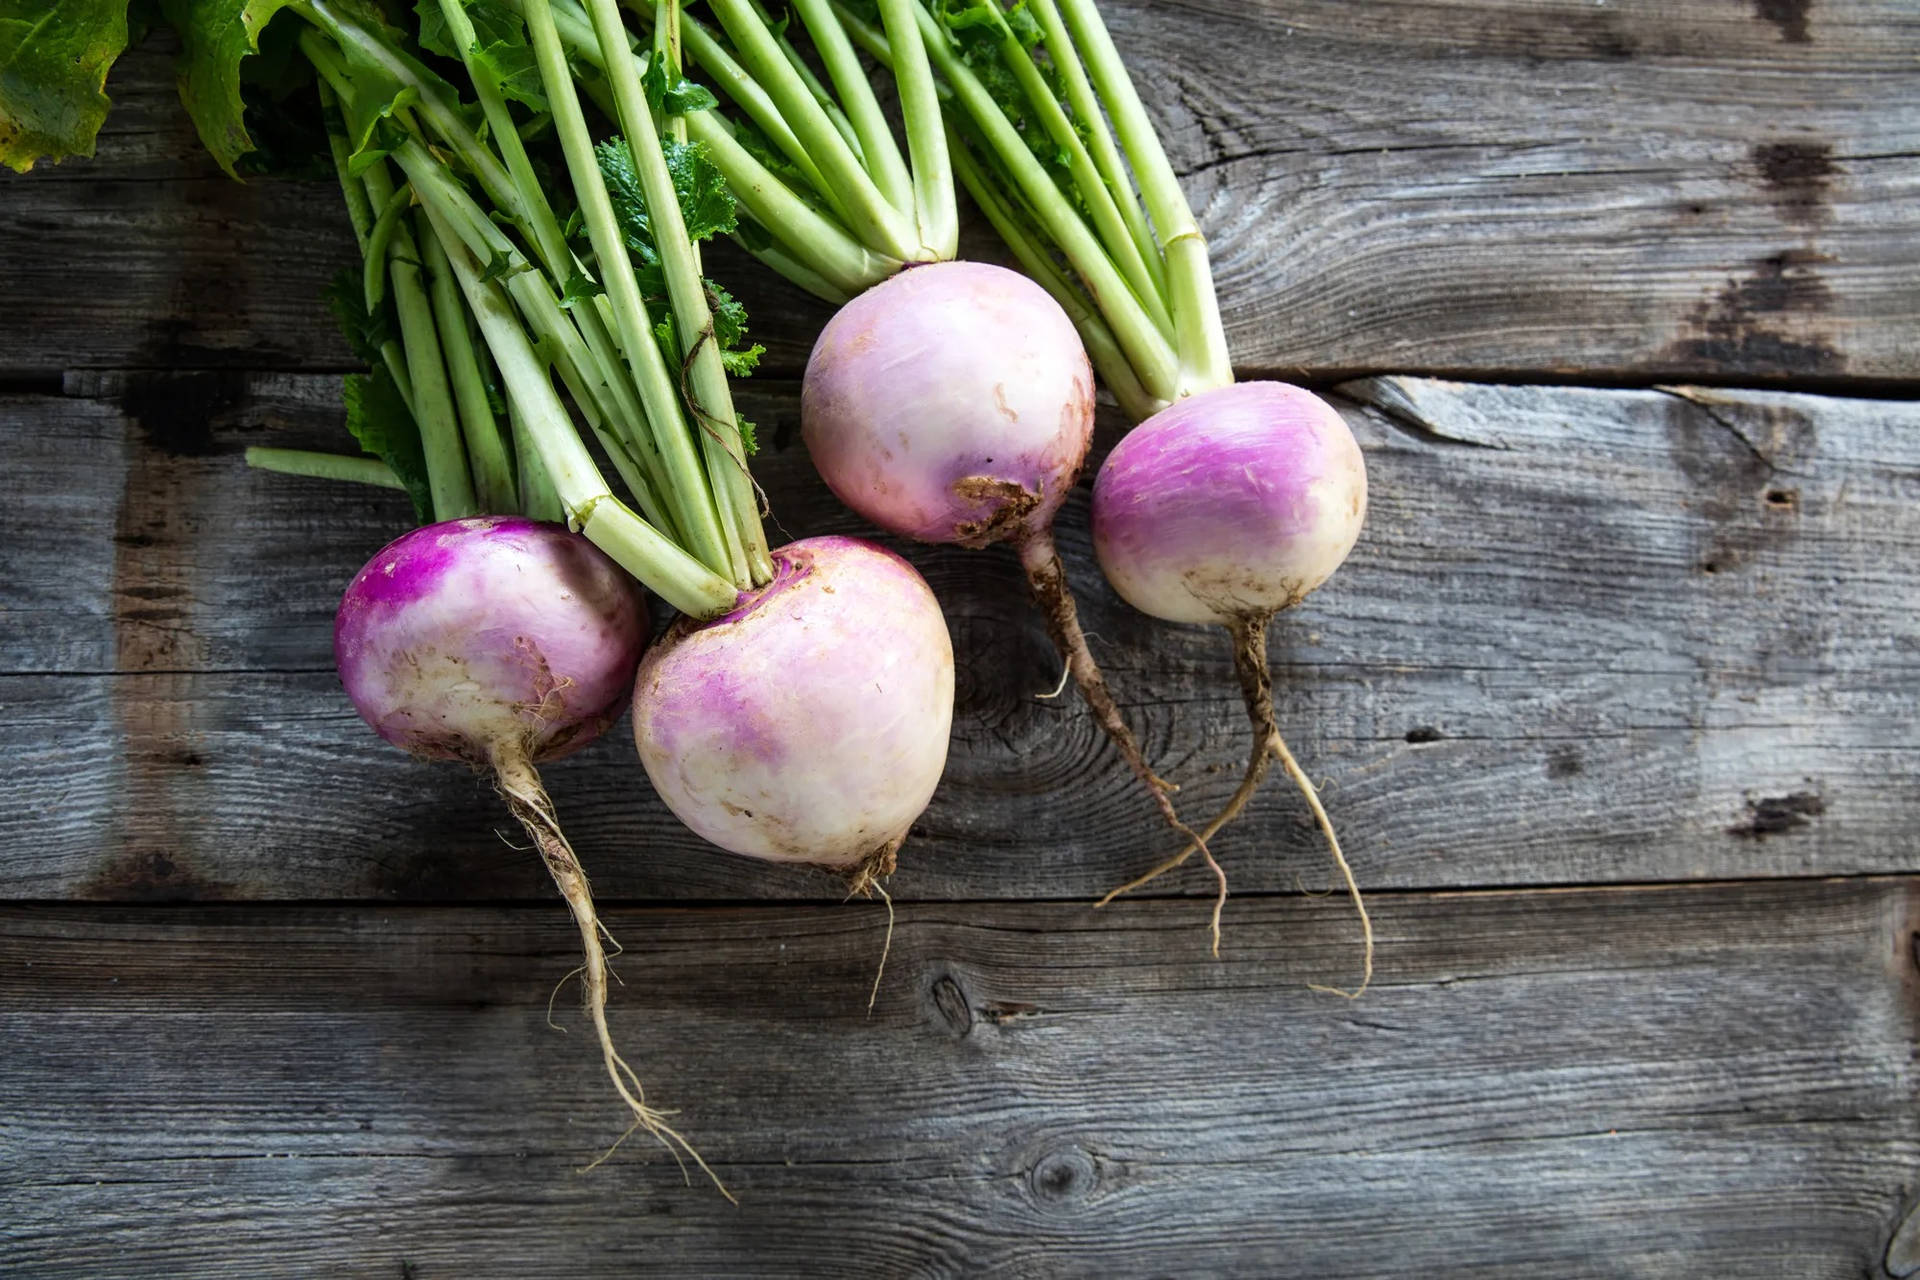 Fresh turnips on a rustic wooden surface Wallpaper